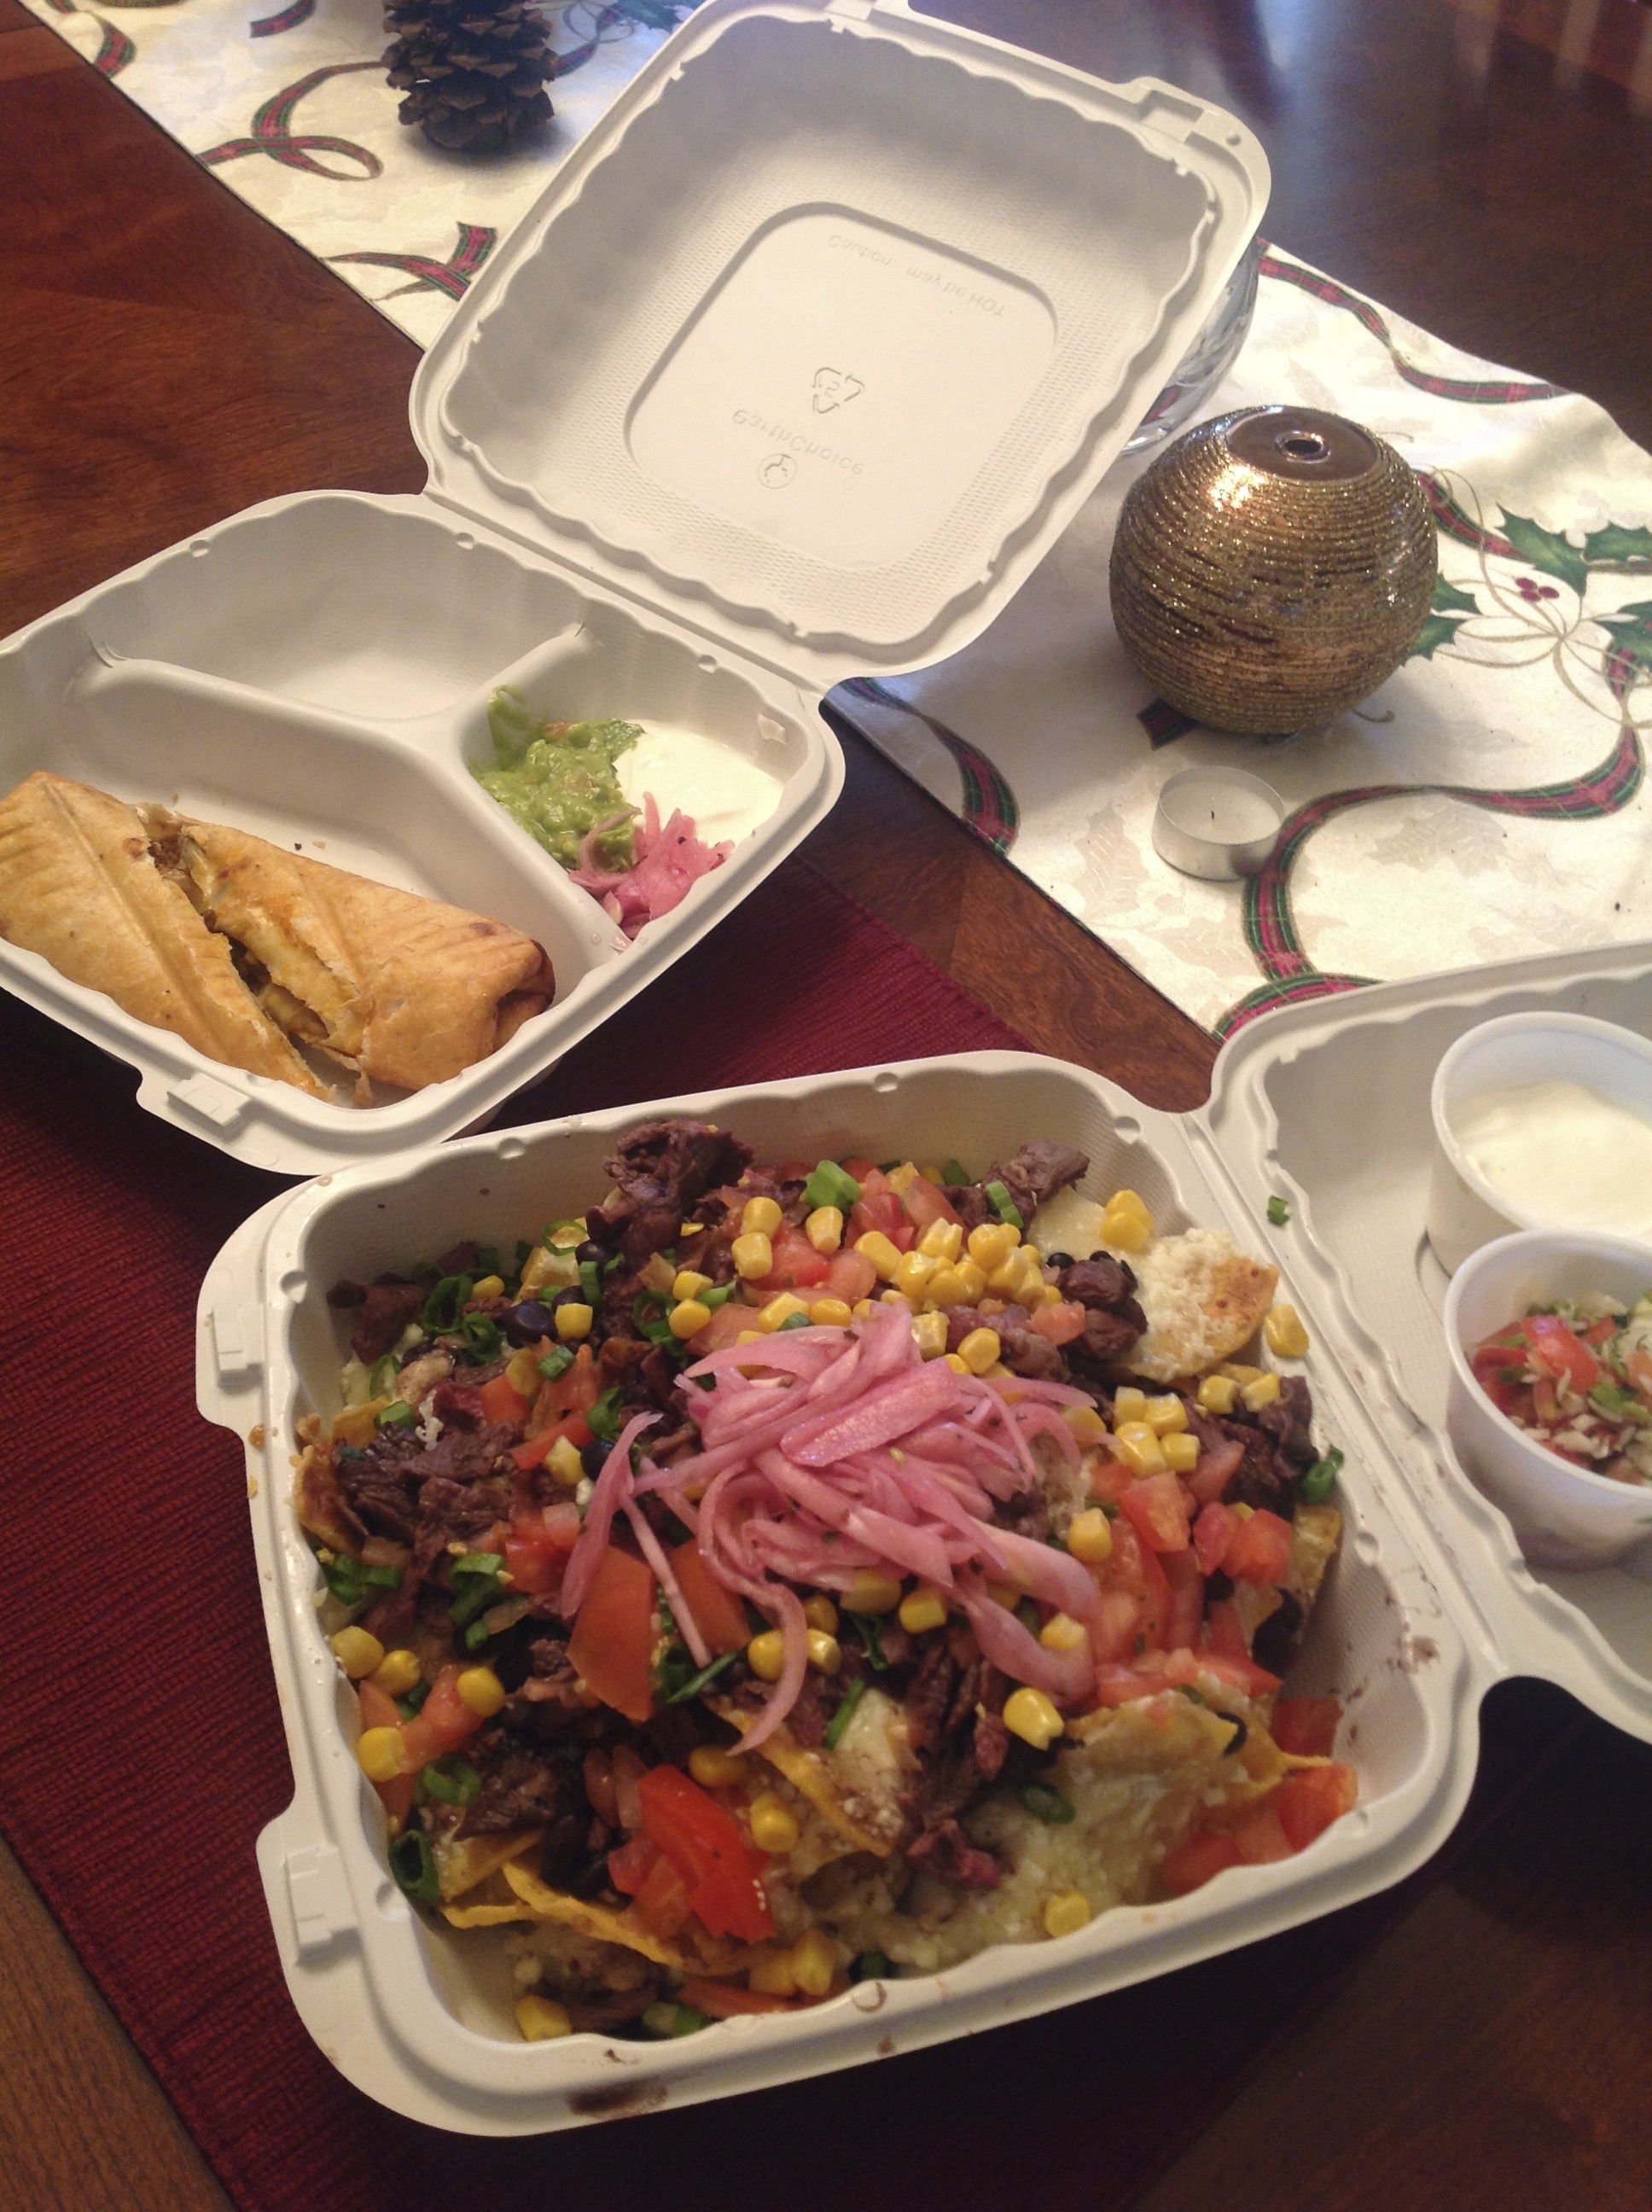 Take out from Agave Cosina restaurant! steak nachos is our fave lately